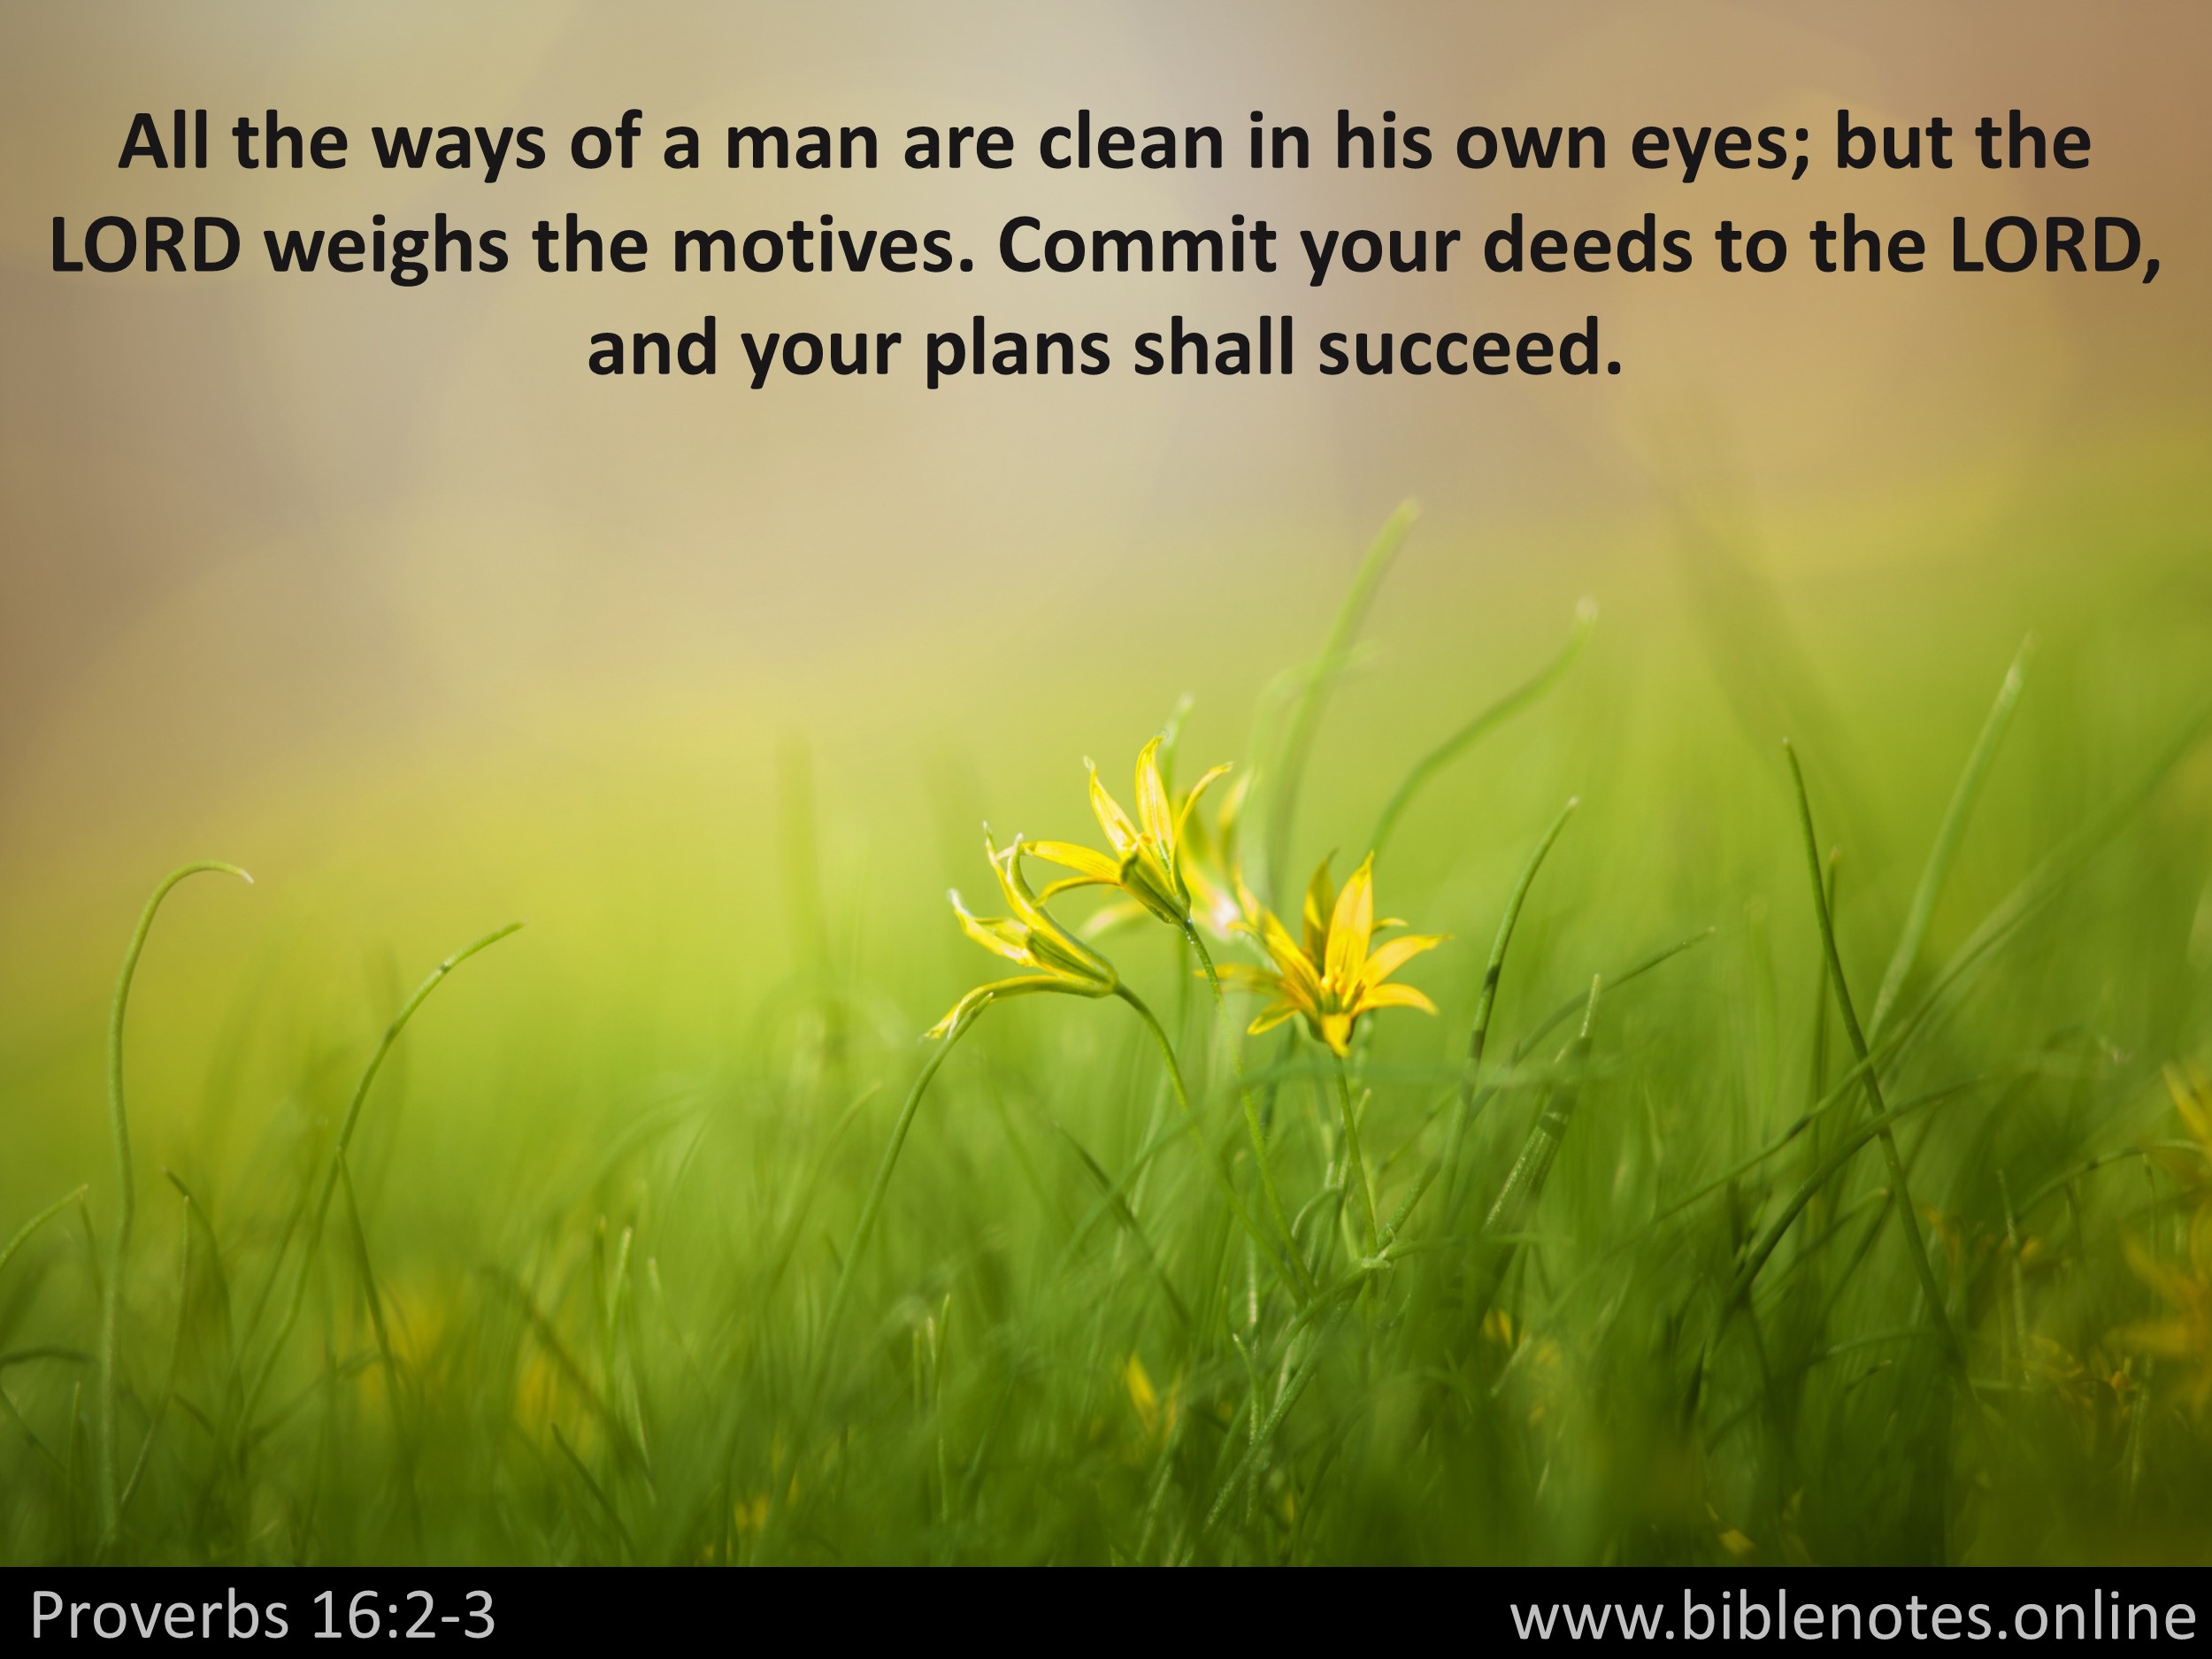 Bible Verse from Proverbs Chapter 16